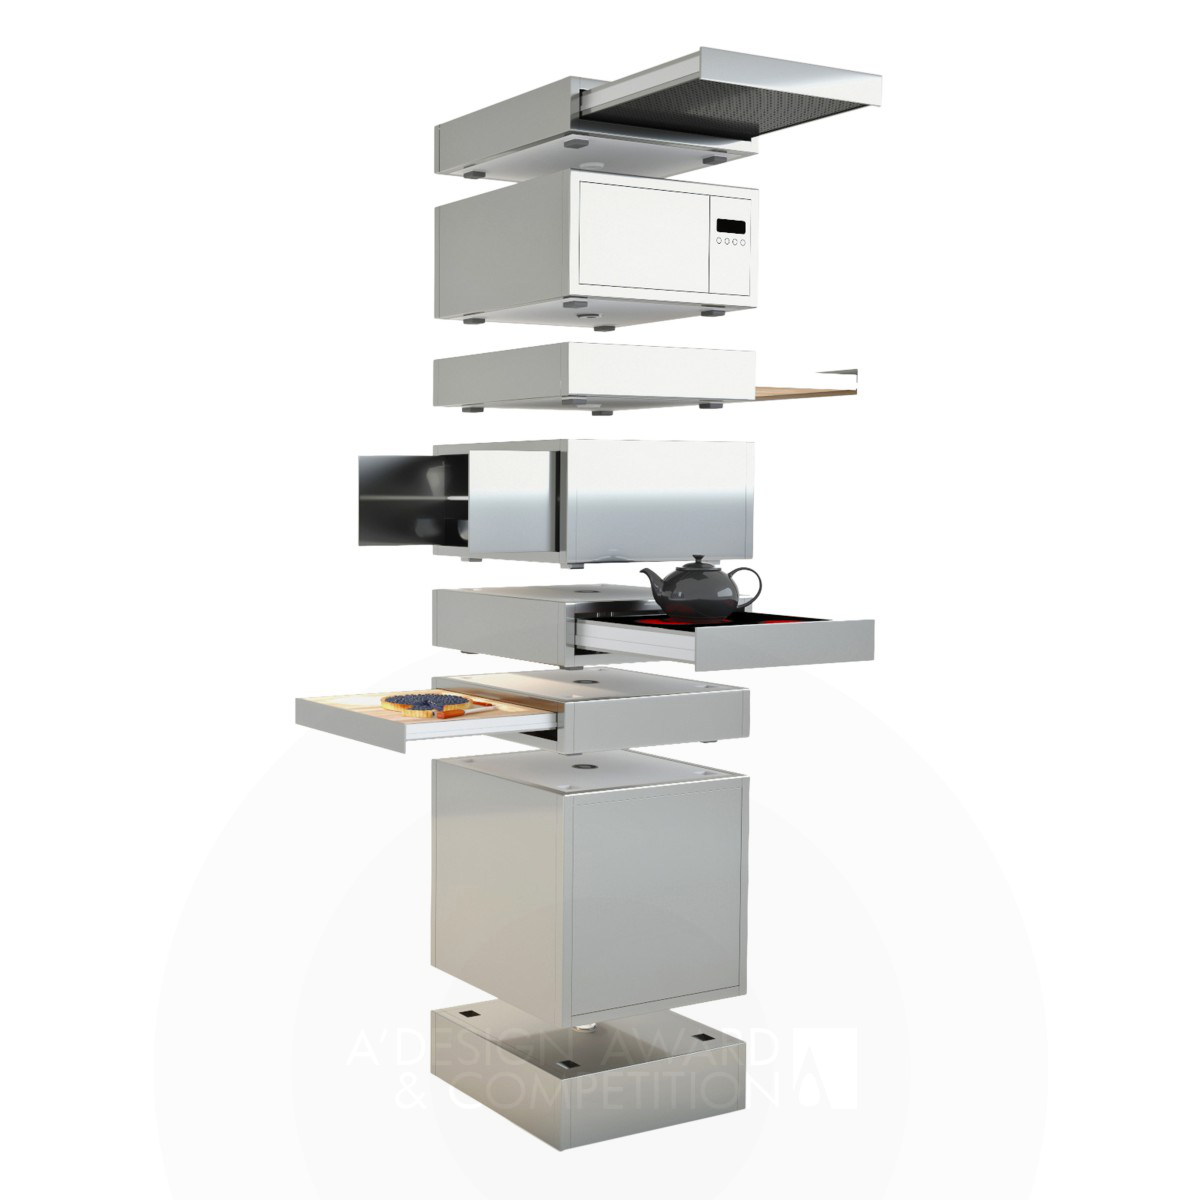 Andrea Cingoli wins Iron at the prestigious A' Kitchen Furniture, Equipment and Fixtures Design Award with Totem Appliances Assembly System.